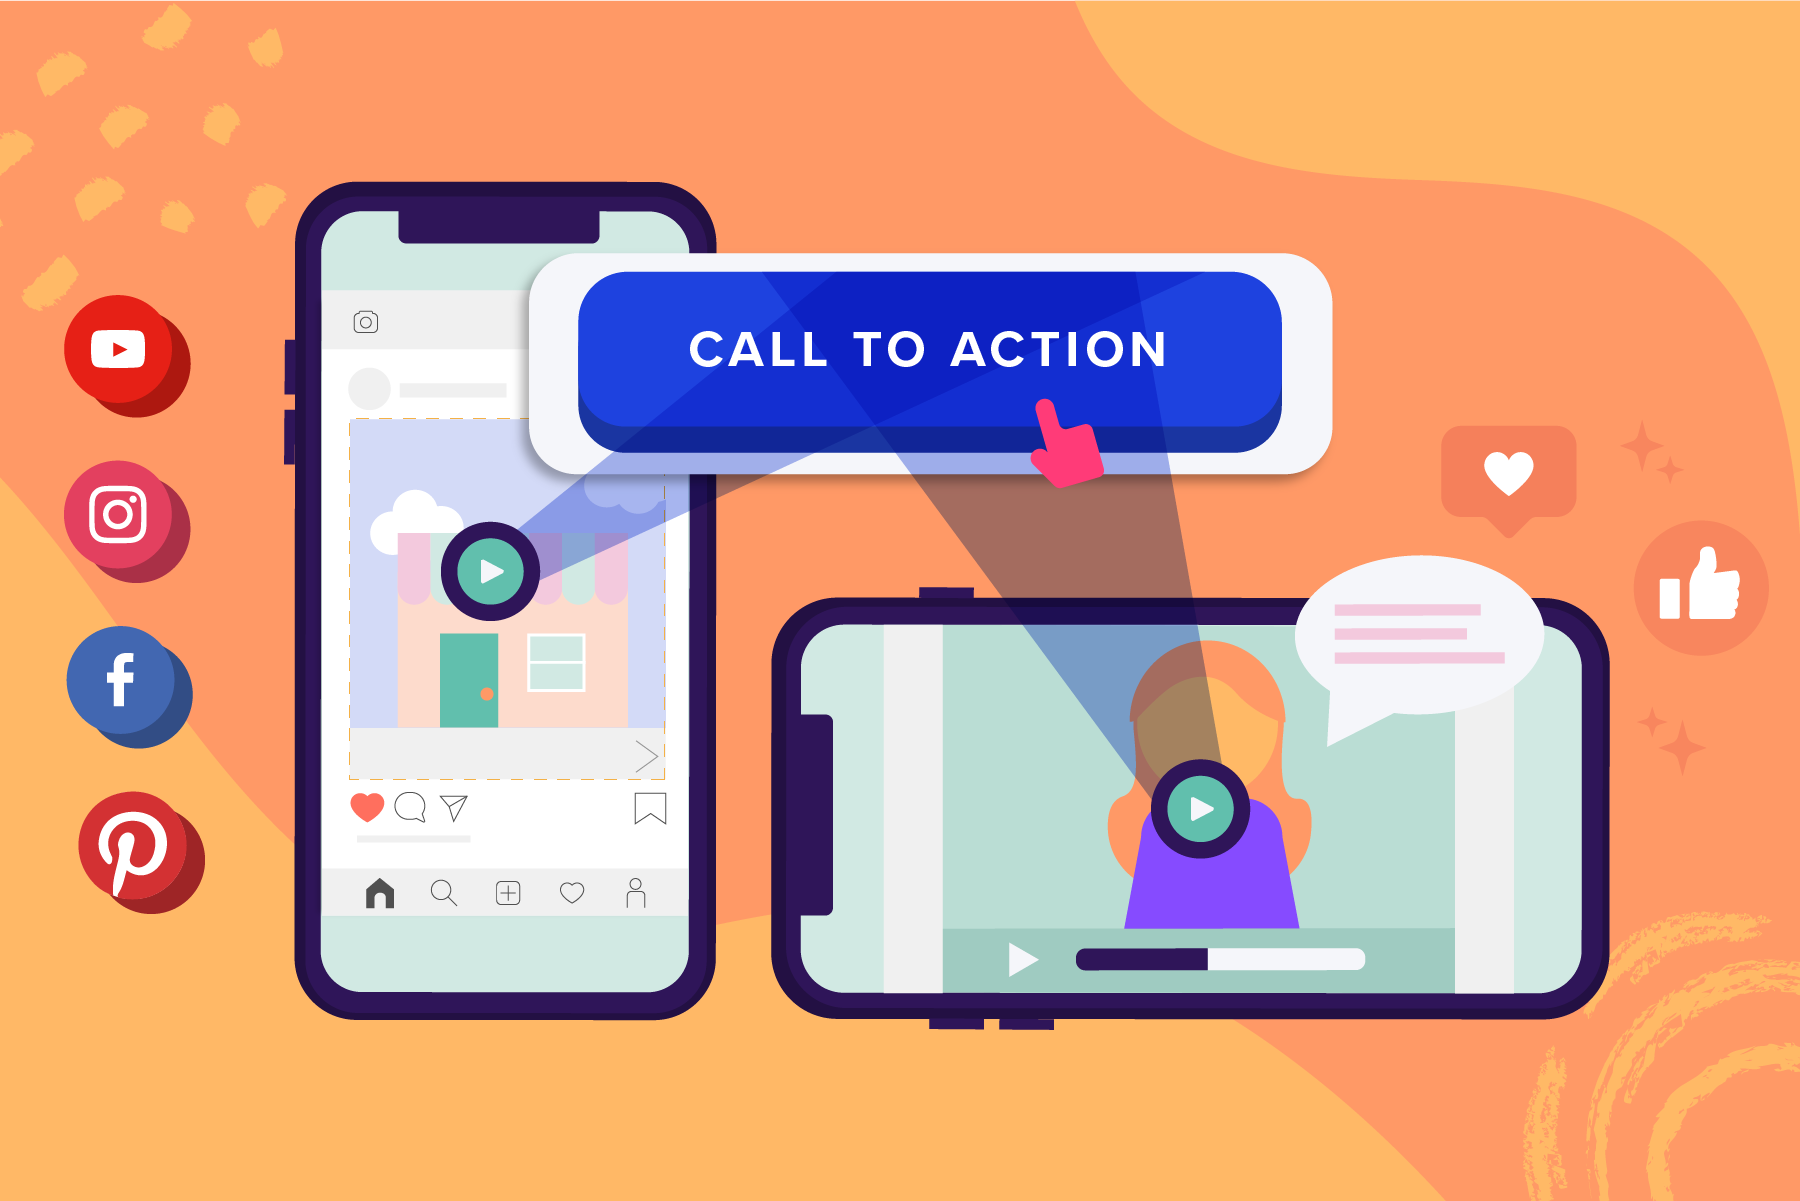 Usage of CTA (Call to Action)